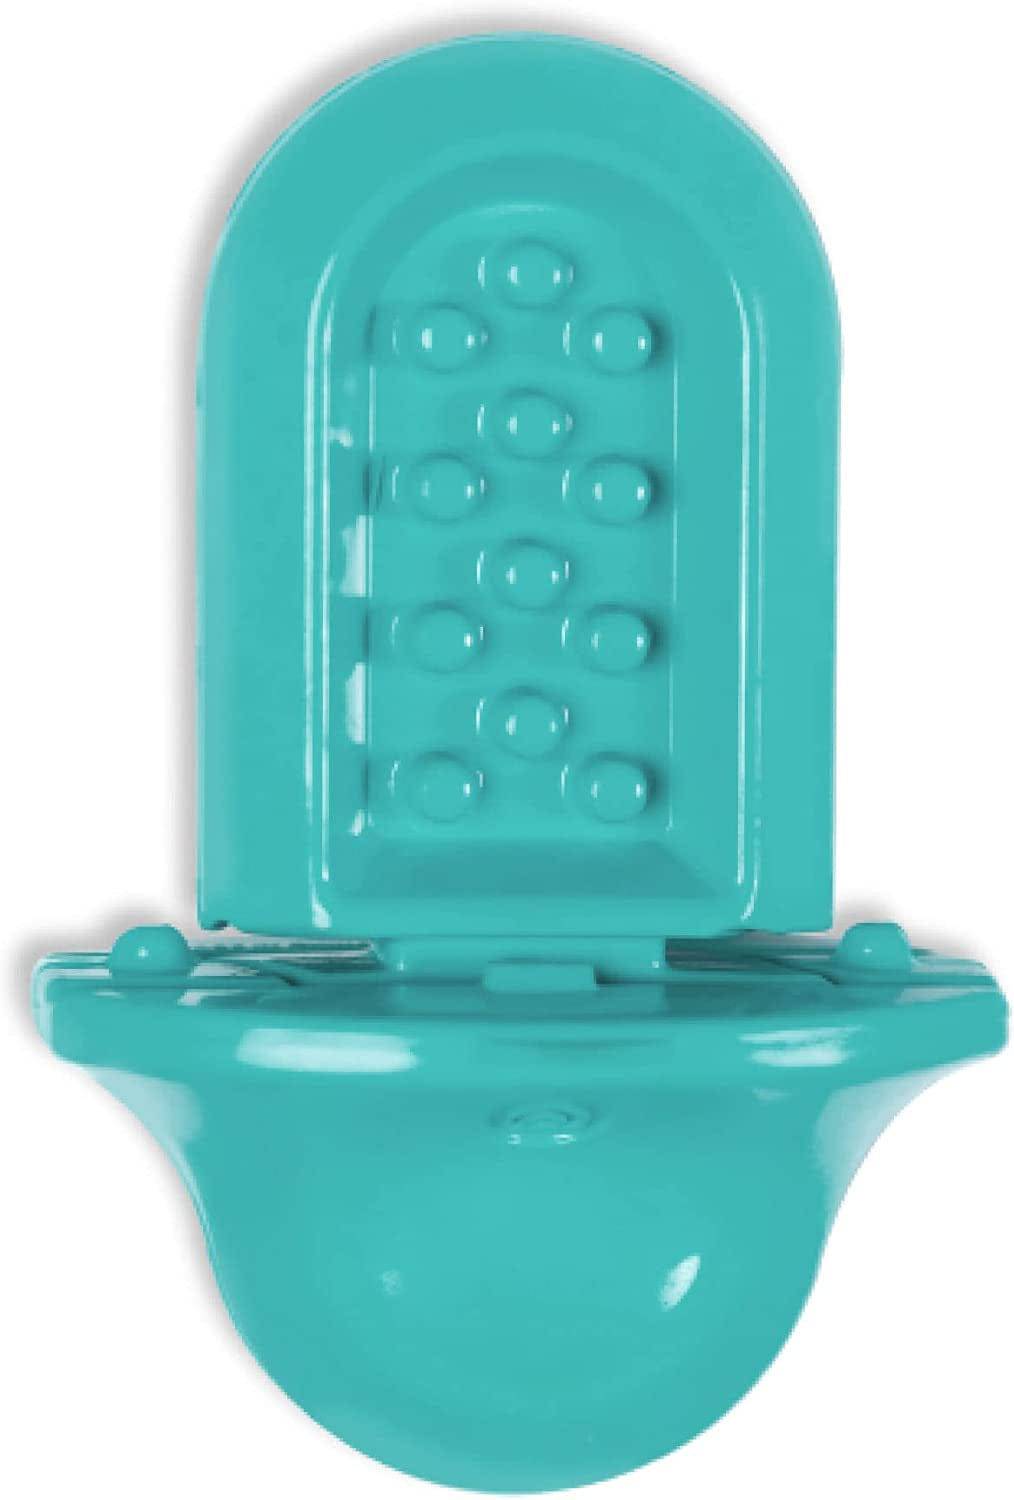 Groov Dog Training Toy Treat Dispenser, Crate Training Aids for Puppies - Felicitails is founded by Lindsay Giguiere